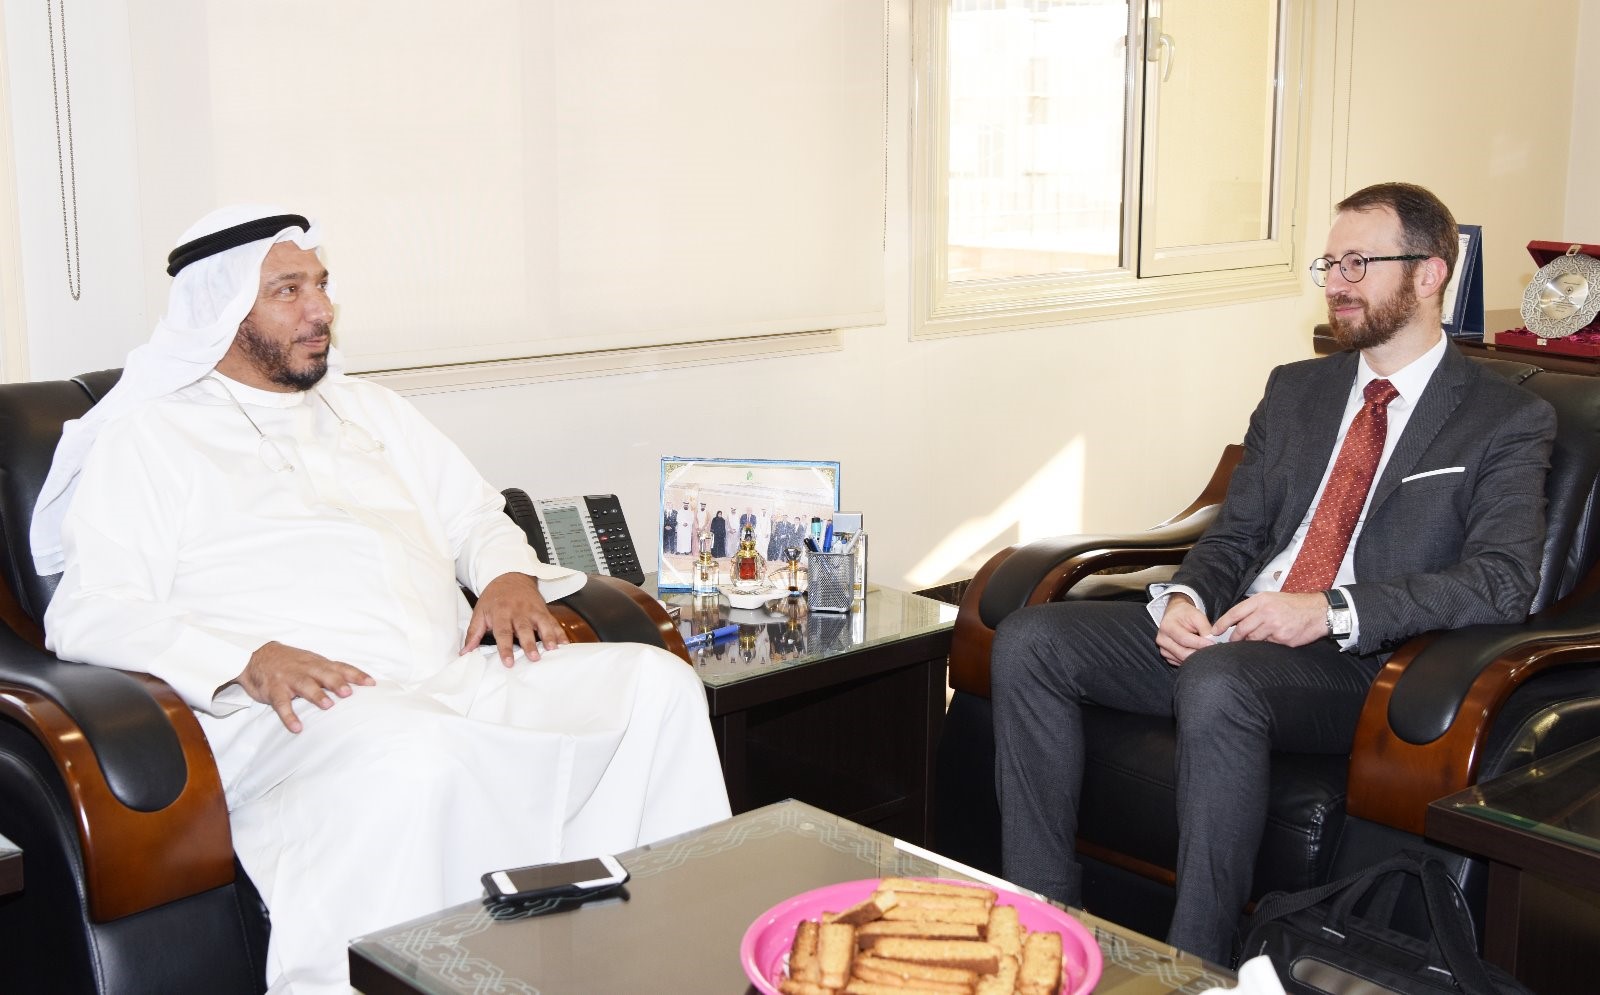 Chairman of Kuwait's (IICO) and Amiri Diwan advisor Dr. Abdullah Al-Matouq meets with Chief of the UNRWA Donor Relations Division, Marc Lassouaoui